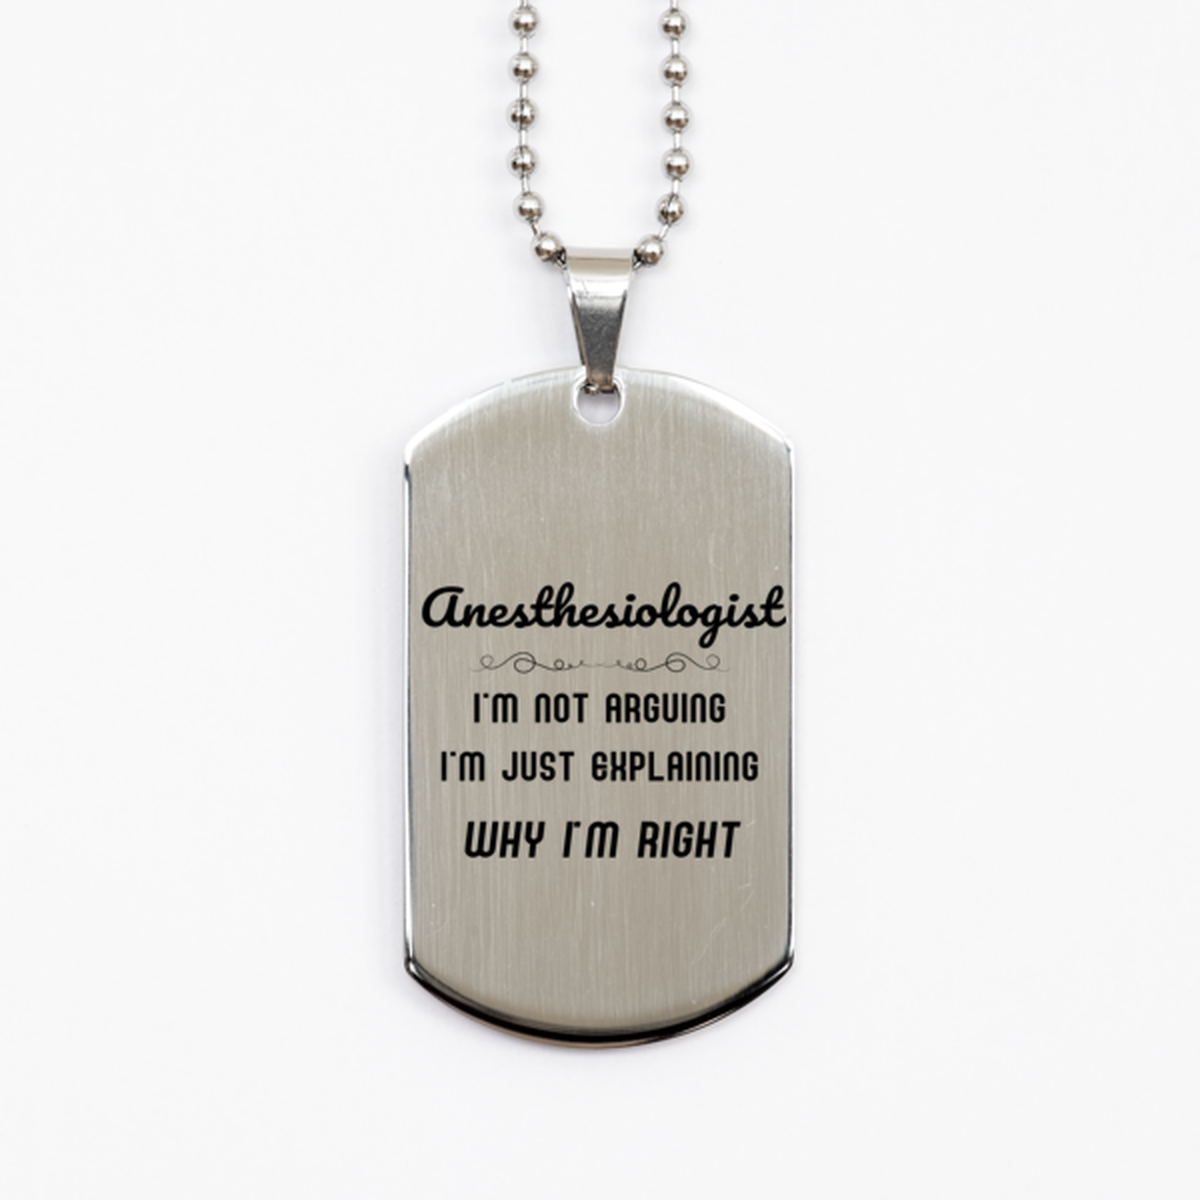 Anesthesiologist I'm not Arguing. I'm Just Explaining Why I'm RIGHT Silver Dog Tag, Funny Saying Quote Anesthesiologist Gifts For Anesthesiologist Graduation Birthday Christmas Gifts for Men Women Coworker